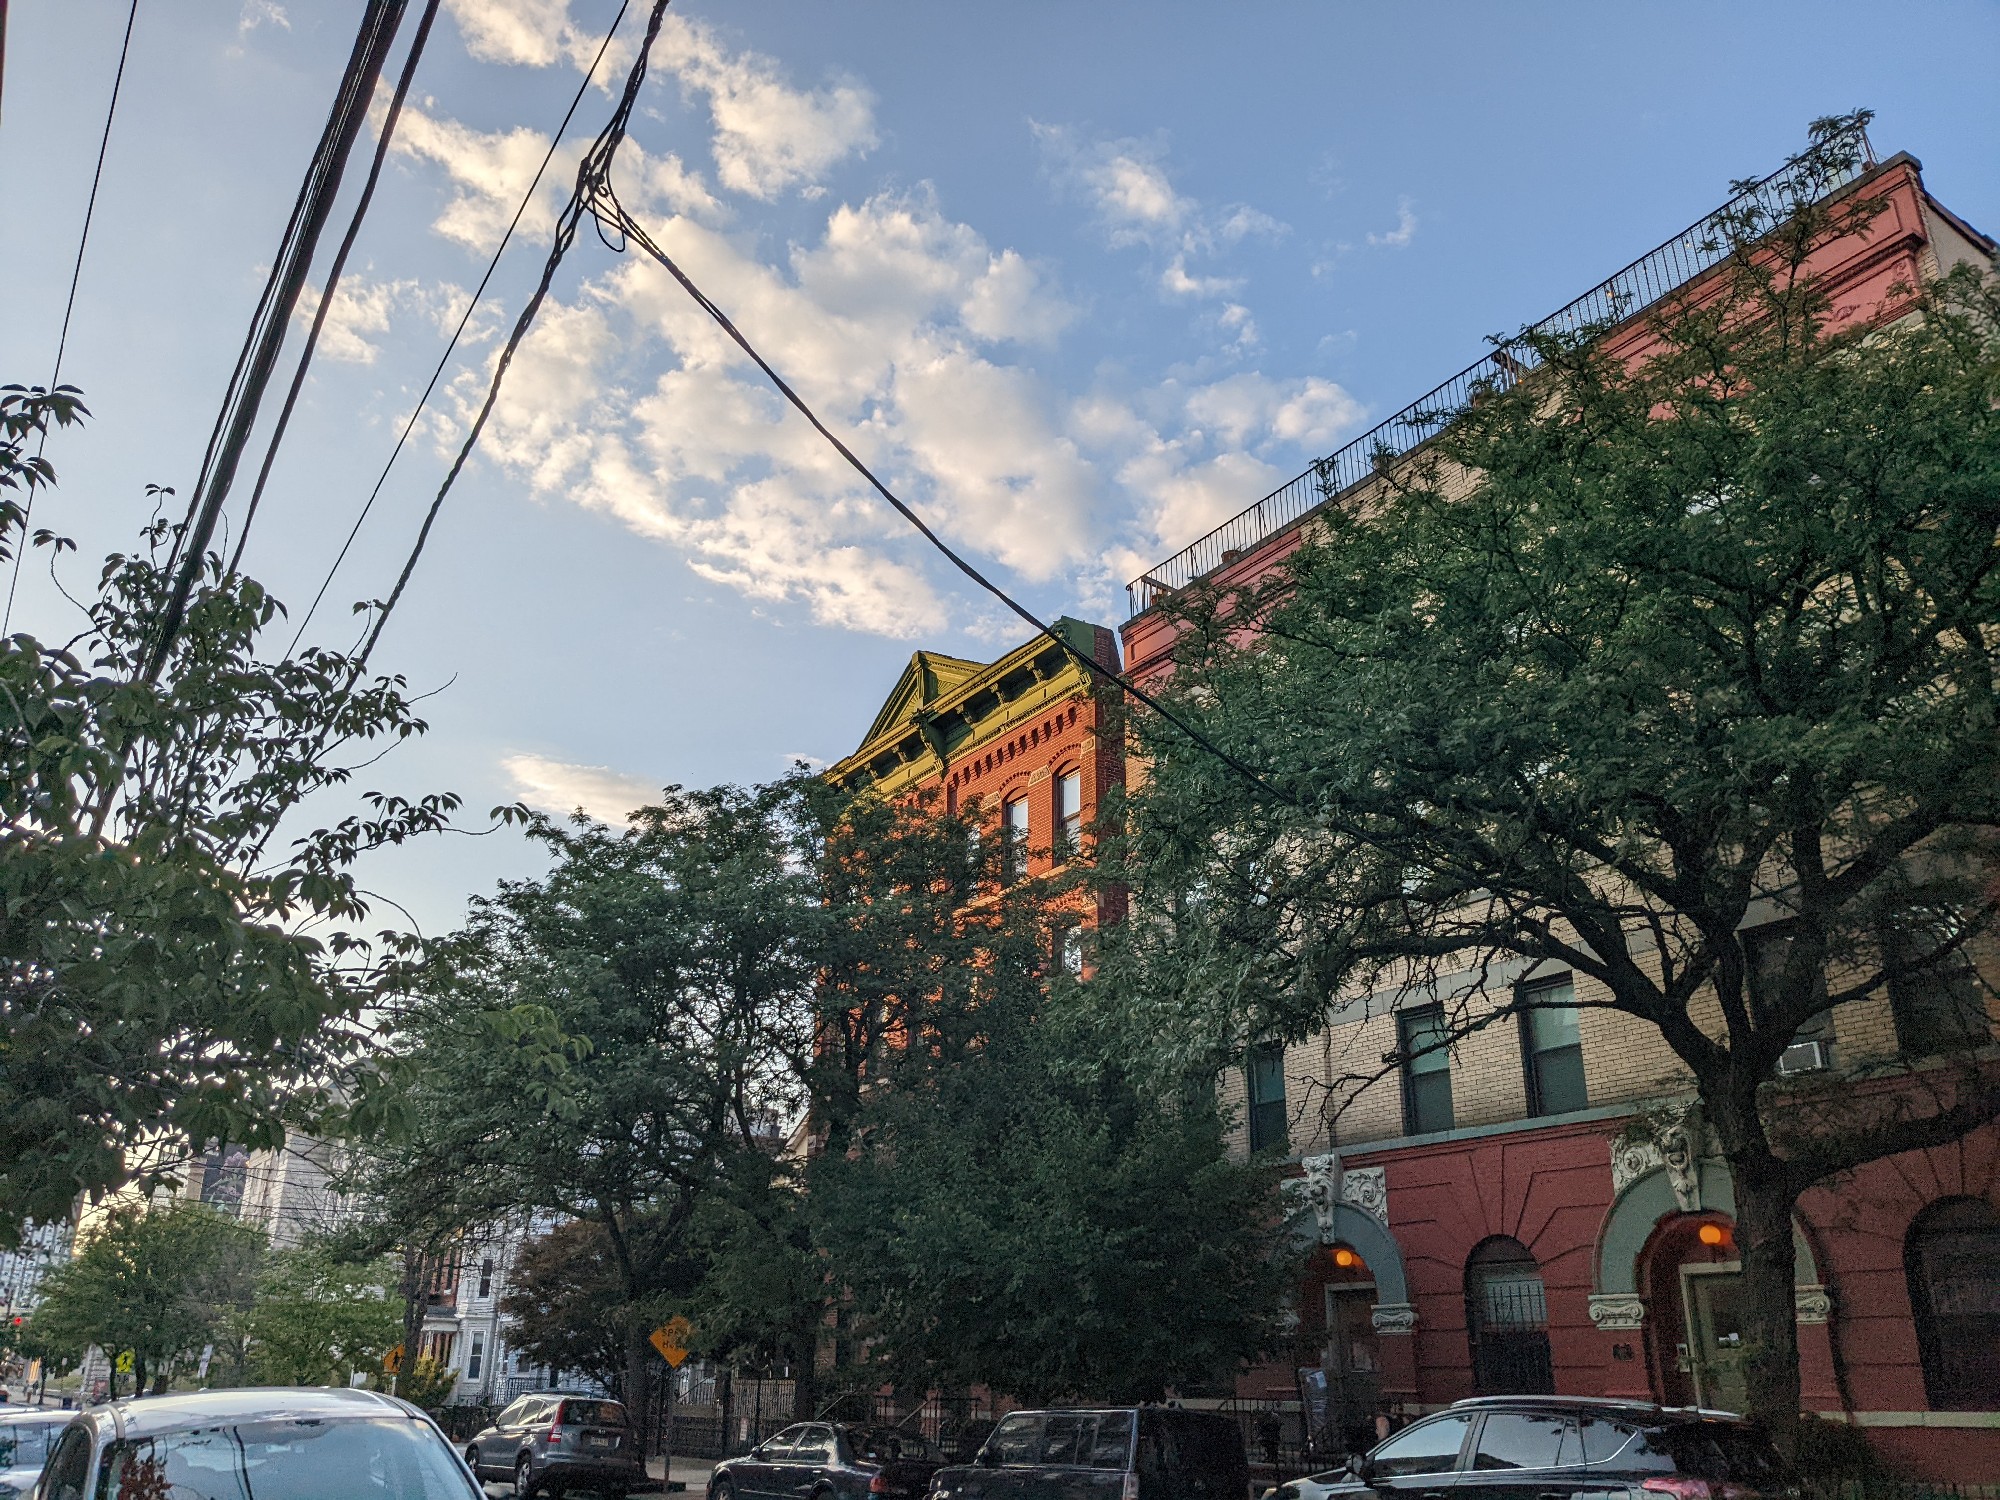 <p>A picture from the Pixel 6a's camera, featuring a red building behind some trees against a blue sky and some clouds.</p>
